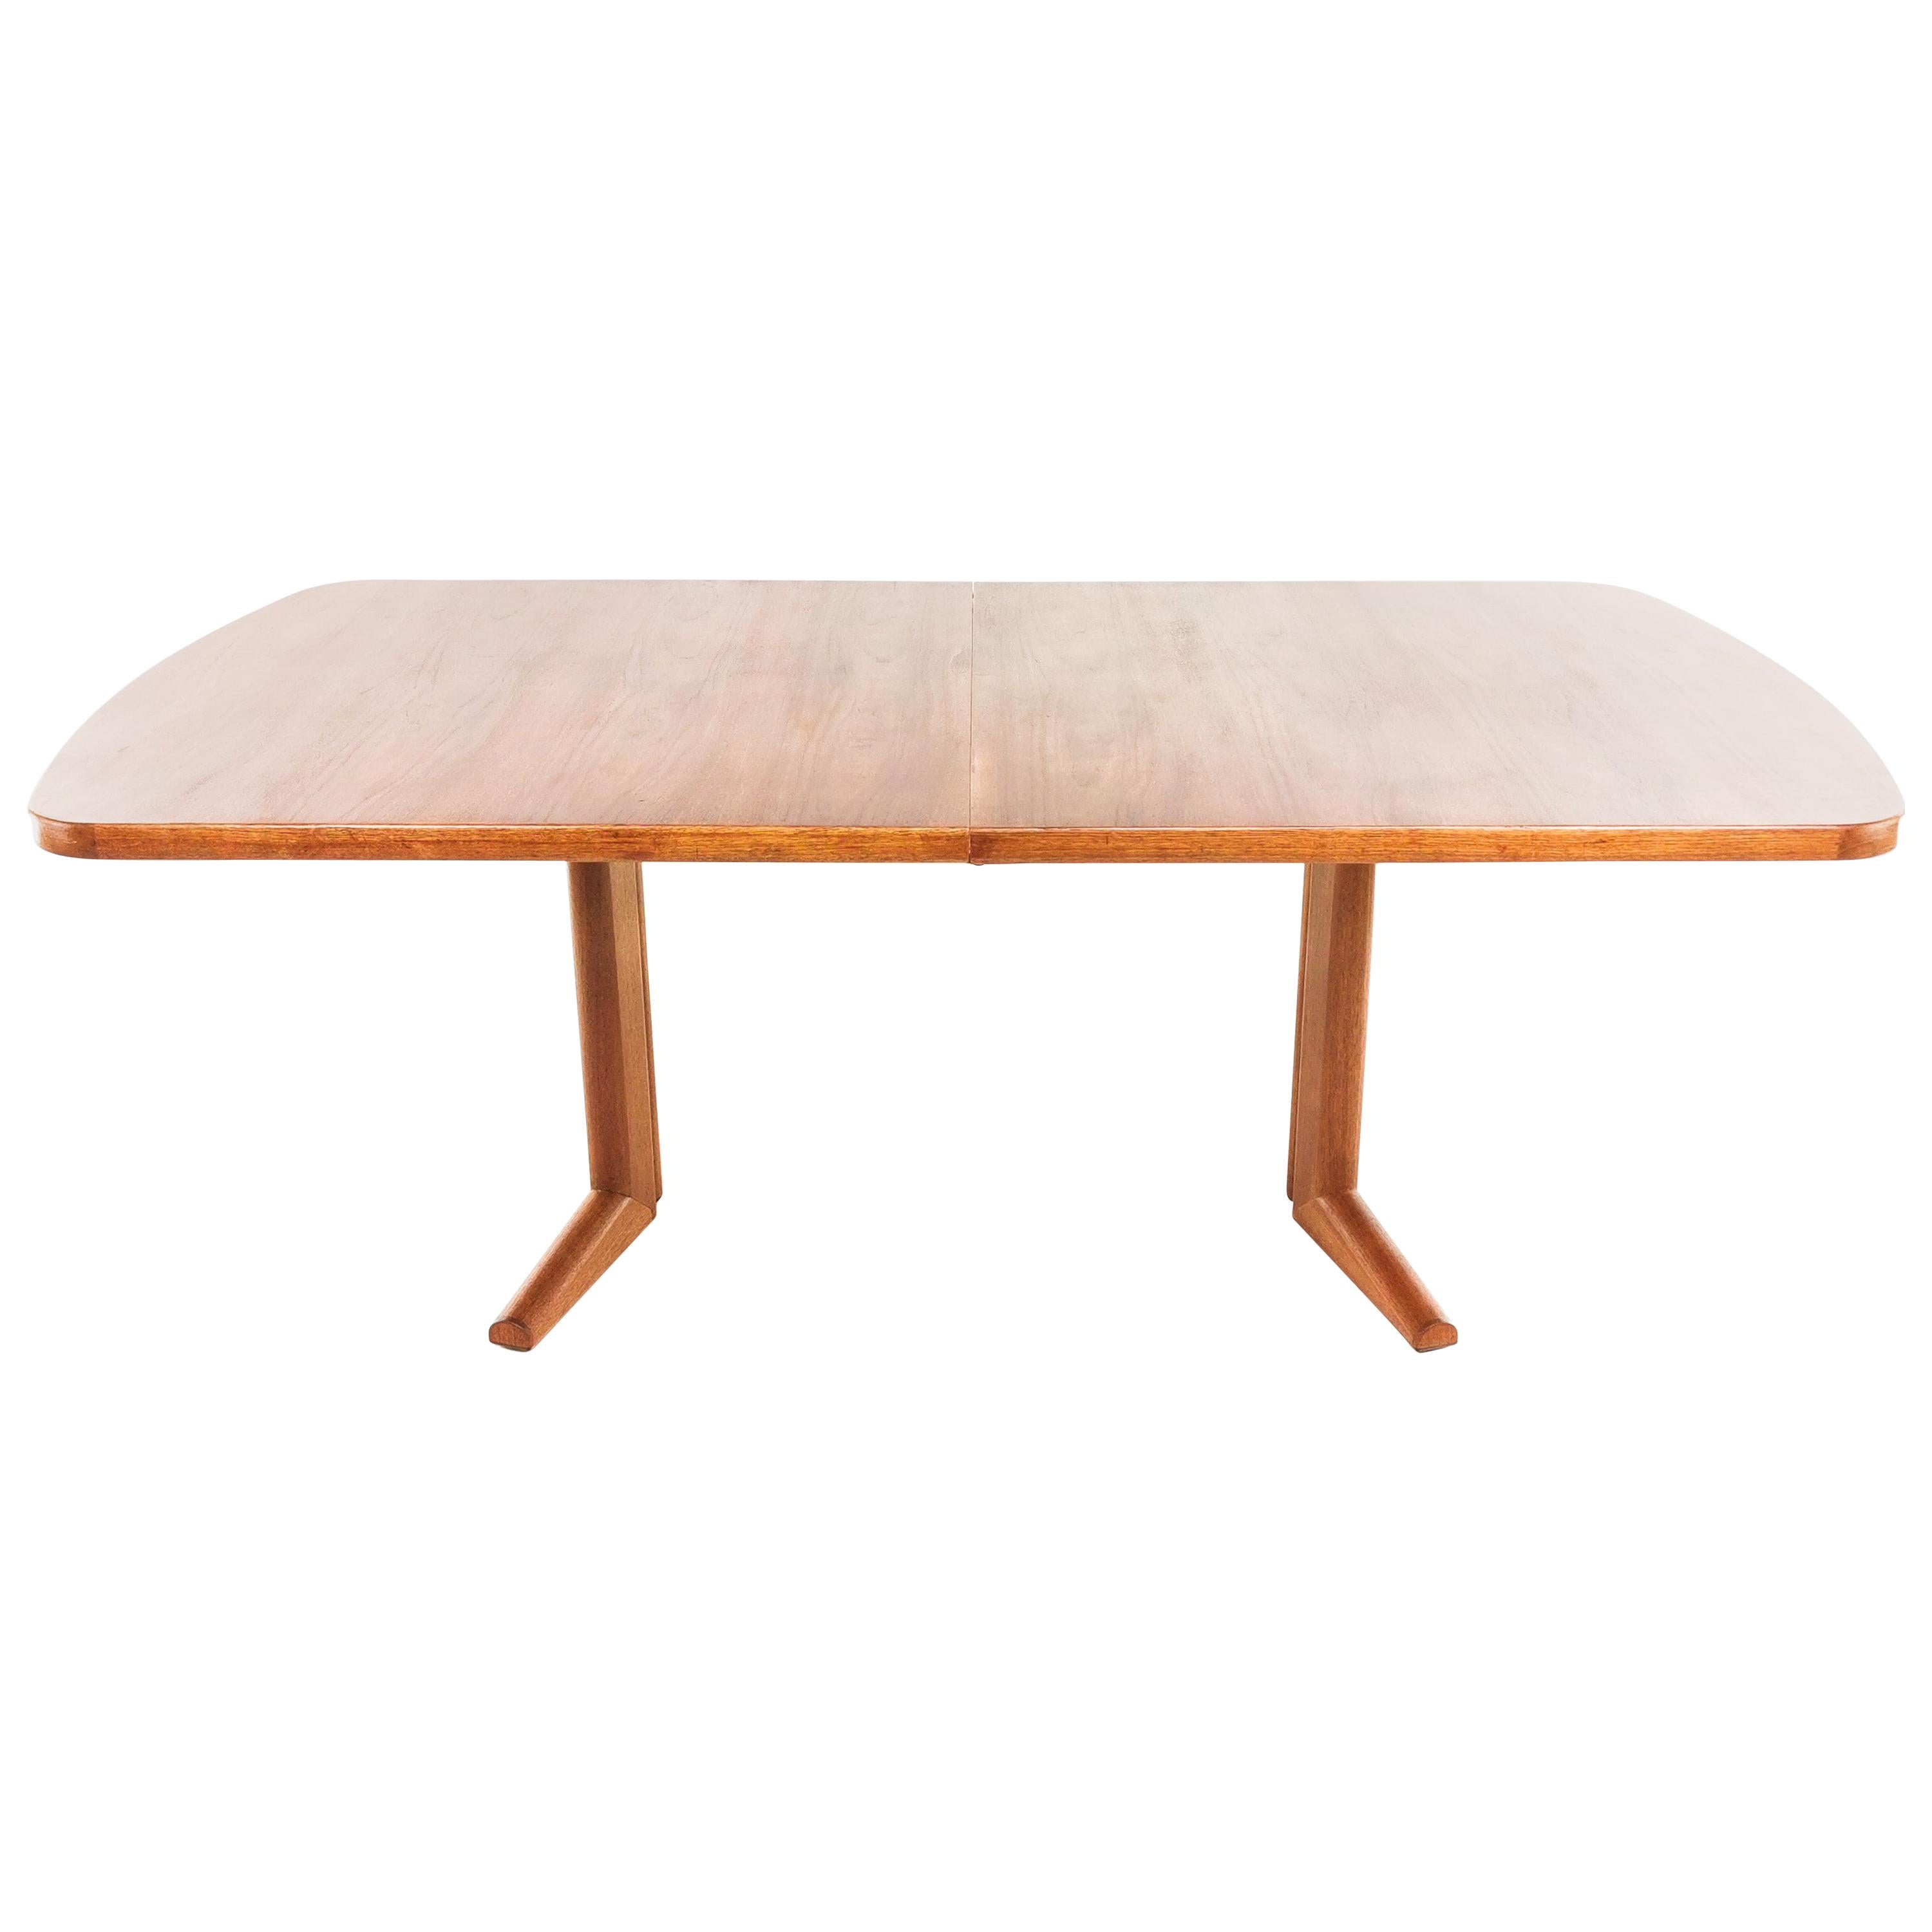 Midcentury Teak Dining Table By Martin Hall for Gordon Russell, 1970s